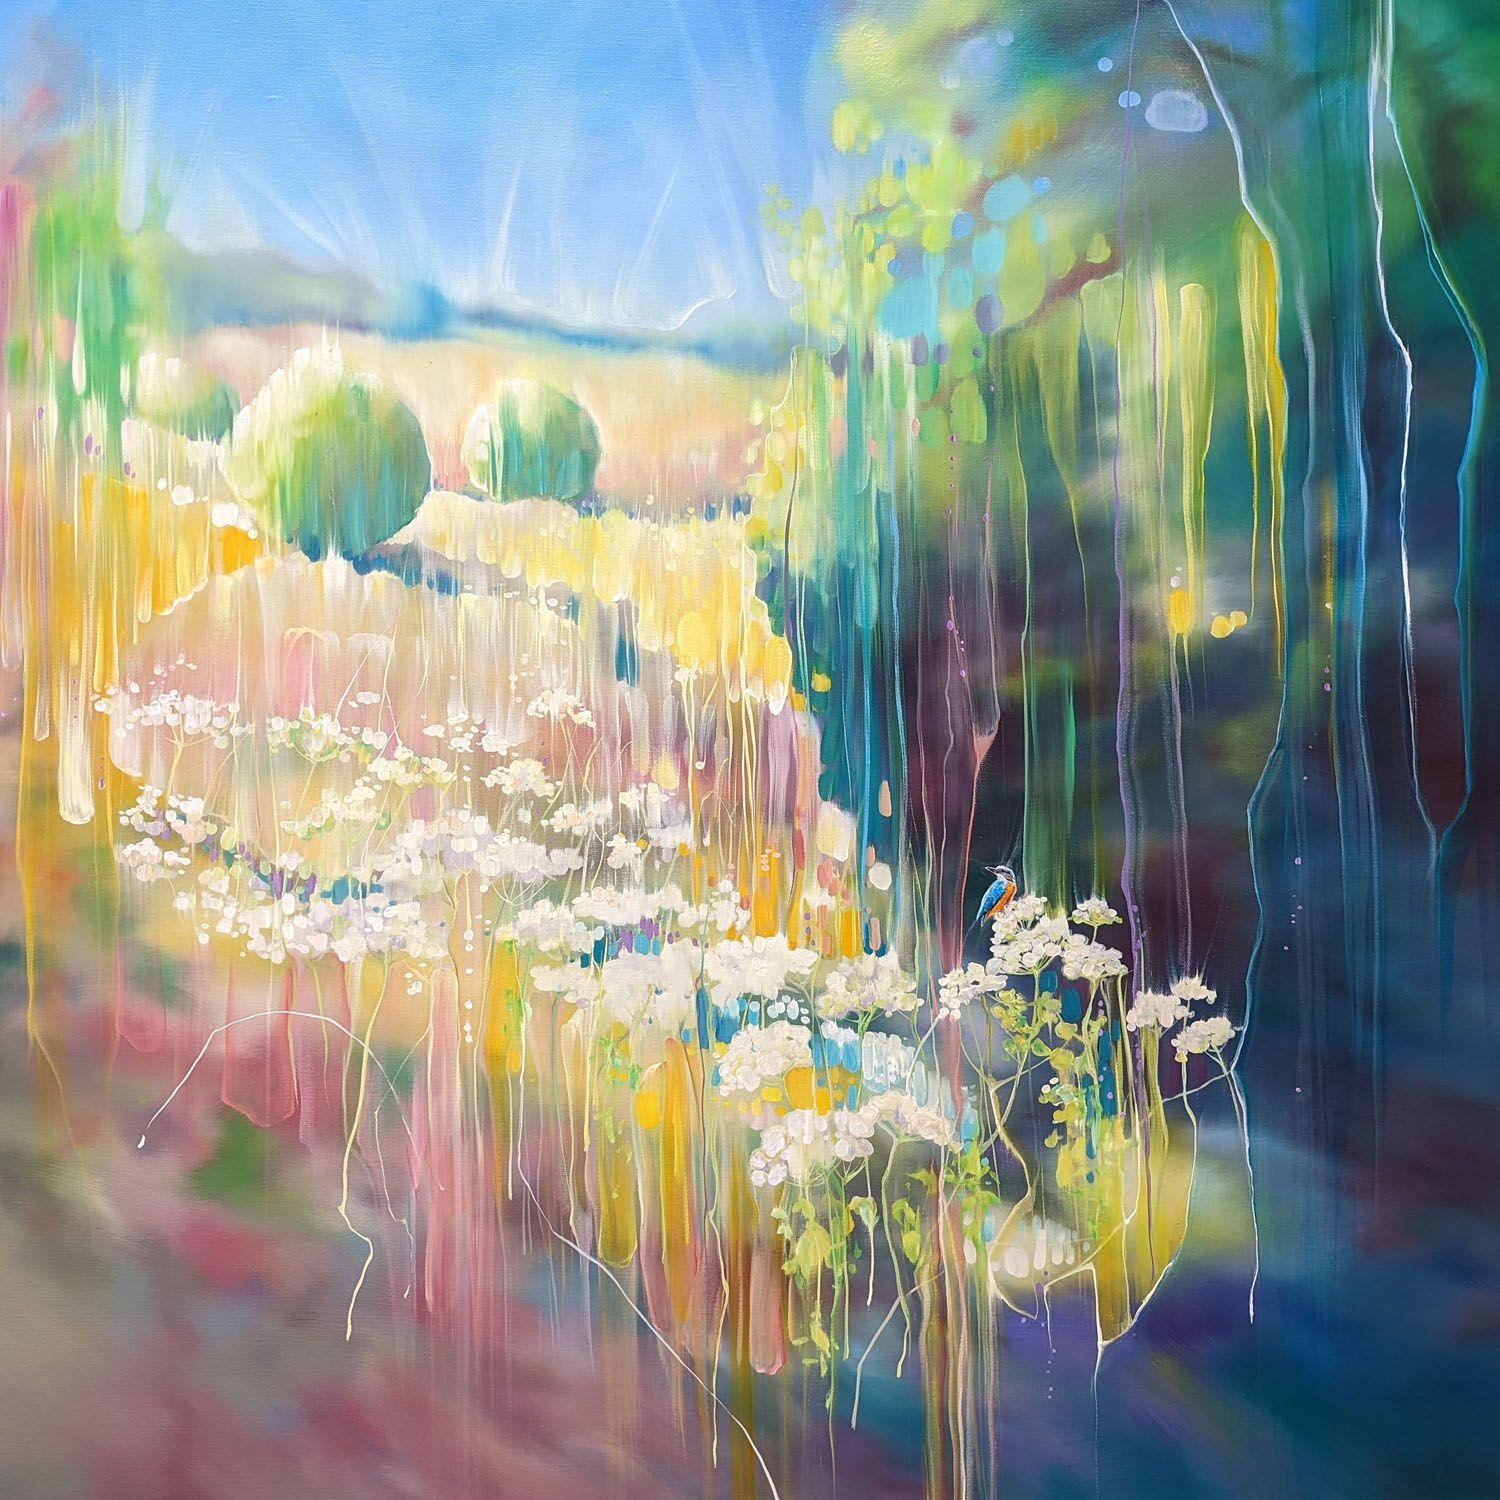 The Jewel of the River is a 40x40x1.5 inches oil painting of a kingfisher by a river surrounded by fields and wildflower meadows. The edges of the painting are blurred so that you are transported into it across the white lacy cow parsley flowers in